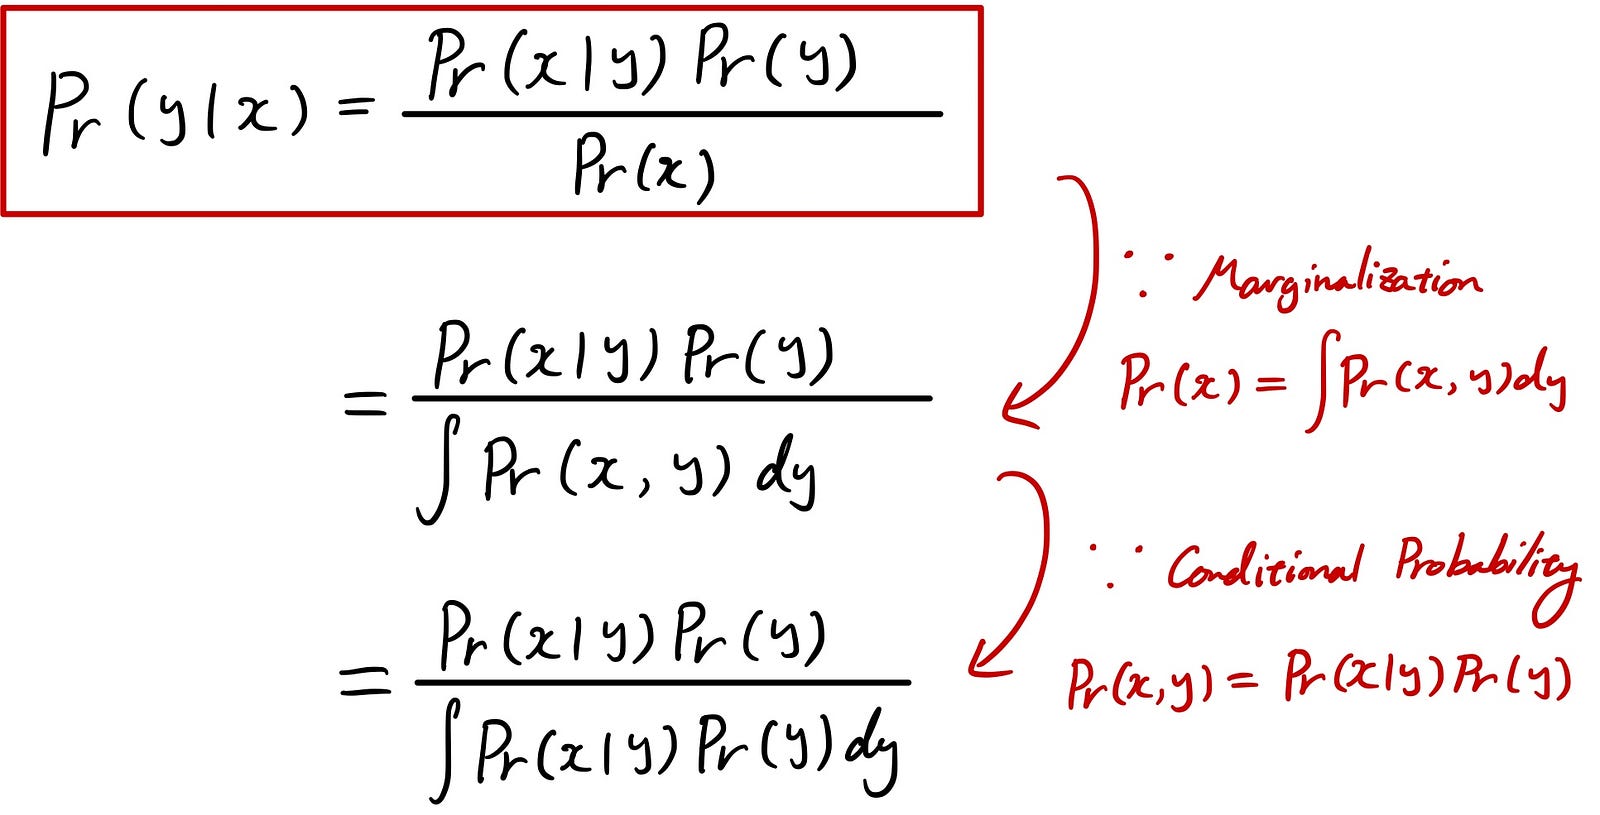 At Most Probability Formula / Conditional Probability (Definition